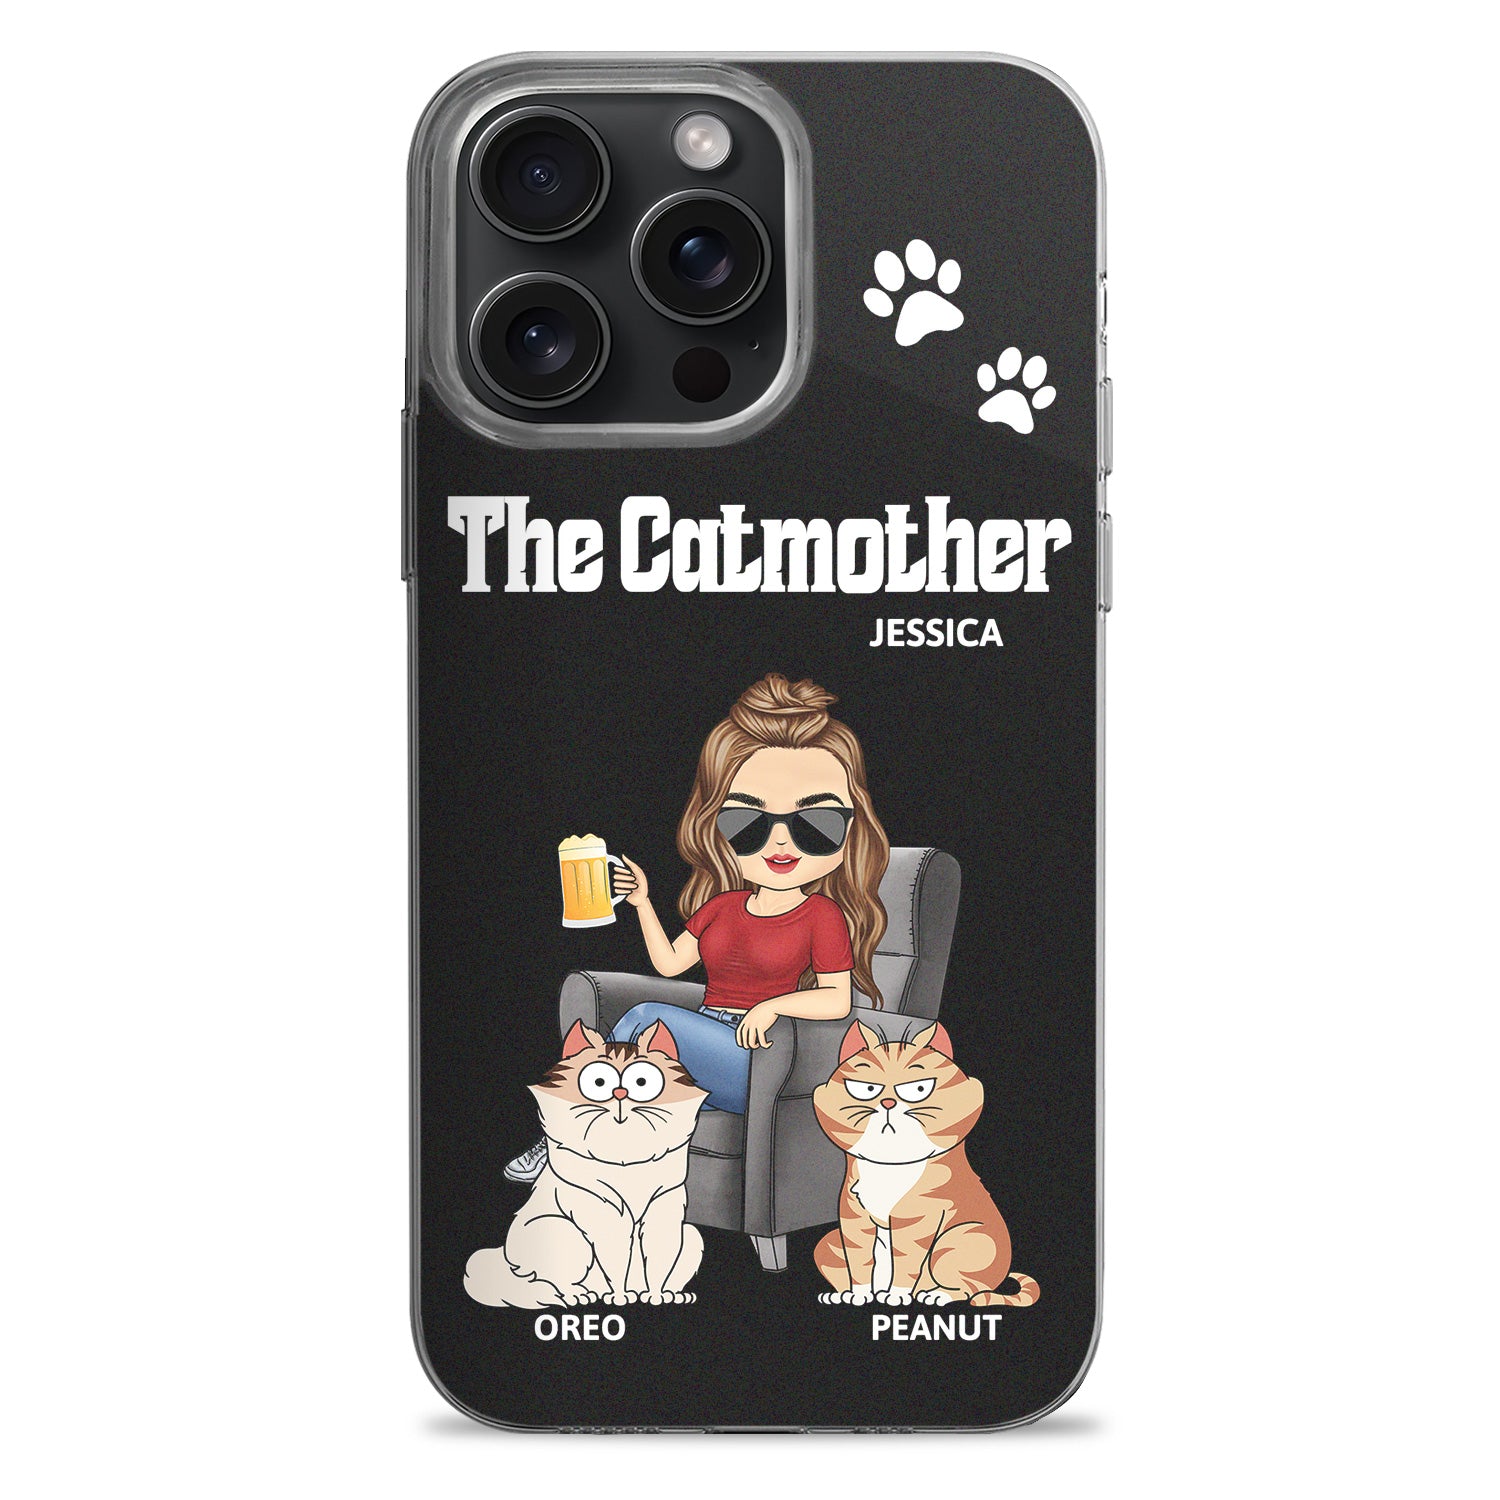 The Cat Mother - Gift For Cat Moms, Cat Lovers, Women - Personalized Clear Phone Case